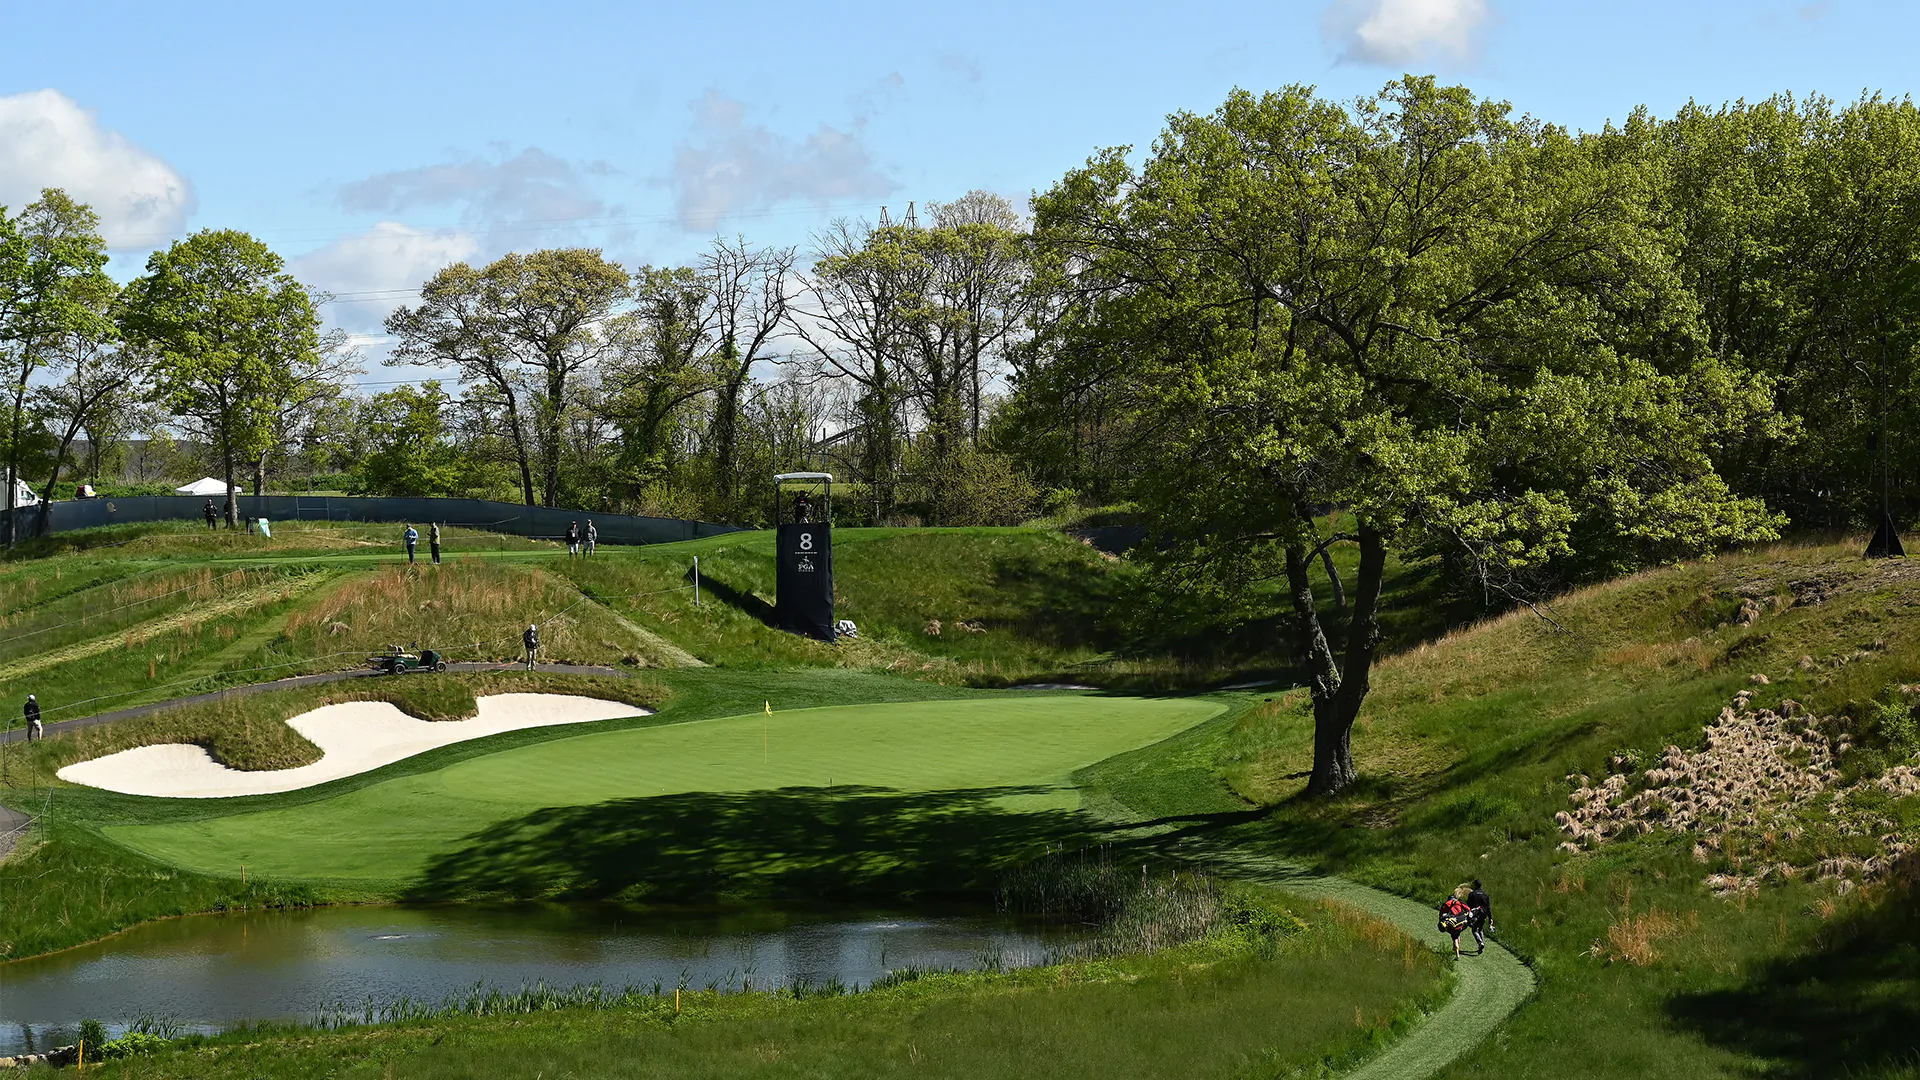 This Bethpage more like U.S. Open Bethpage or PGA Tour Bethpage?